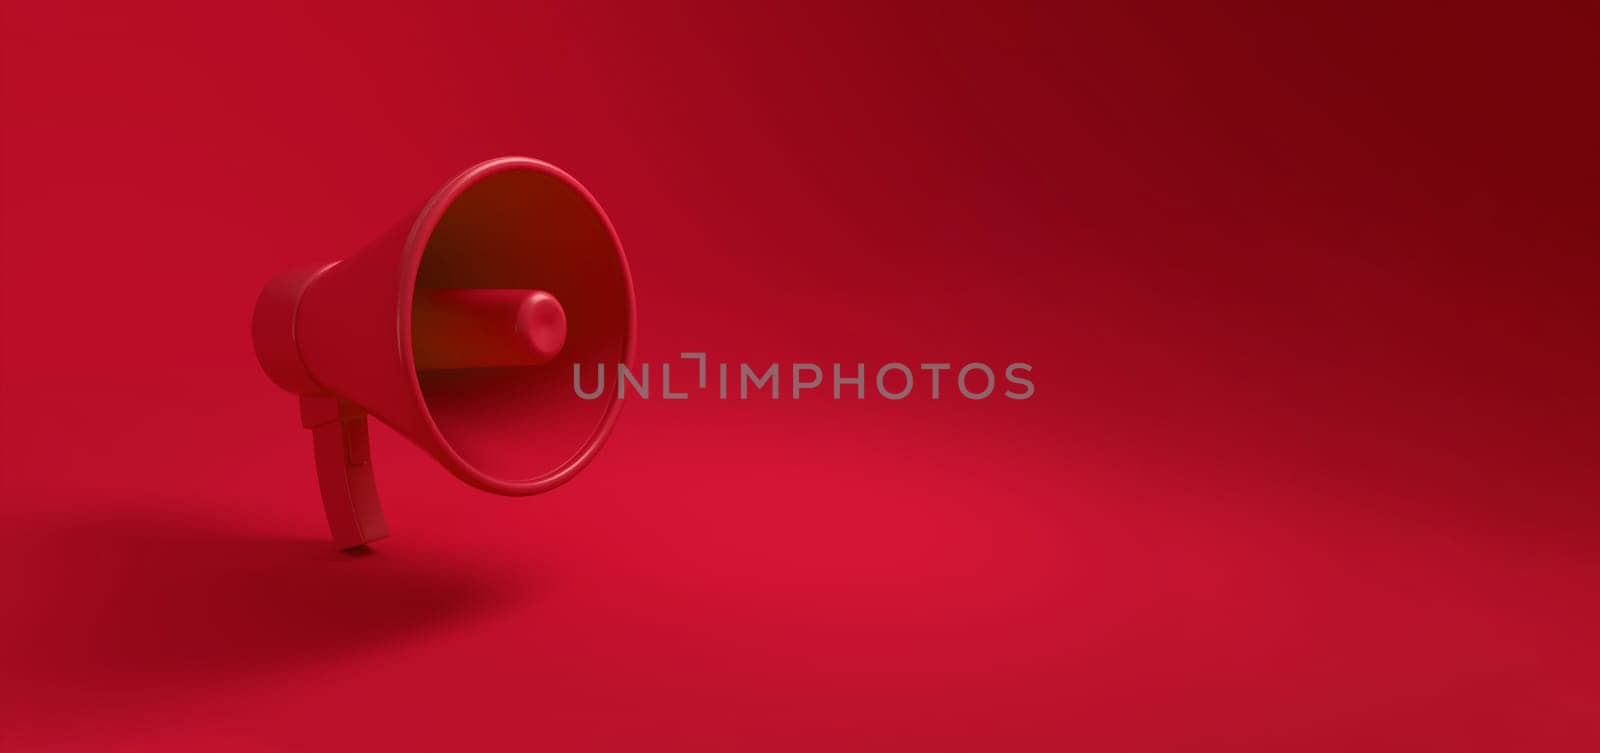 Megaphone on red background, Love and passion concept. 3D illustration.